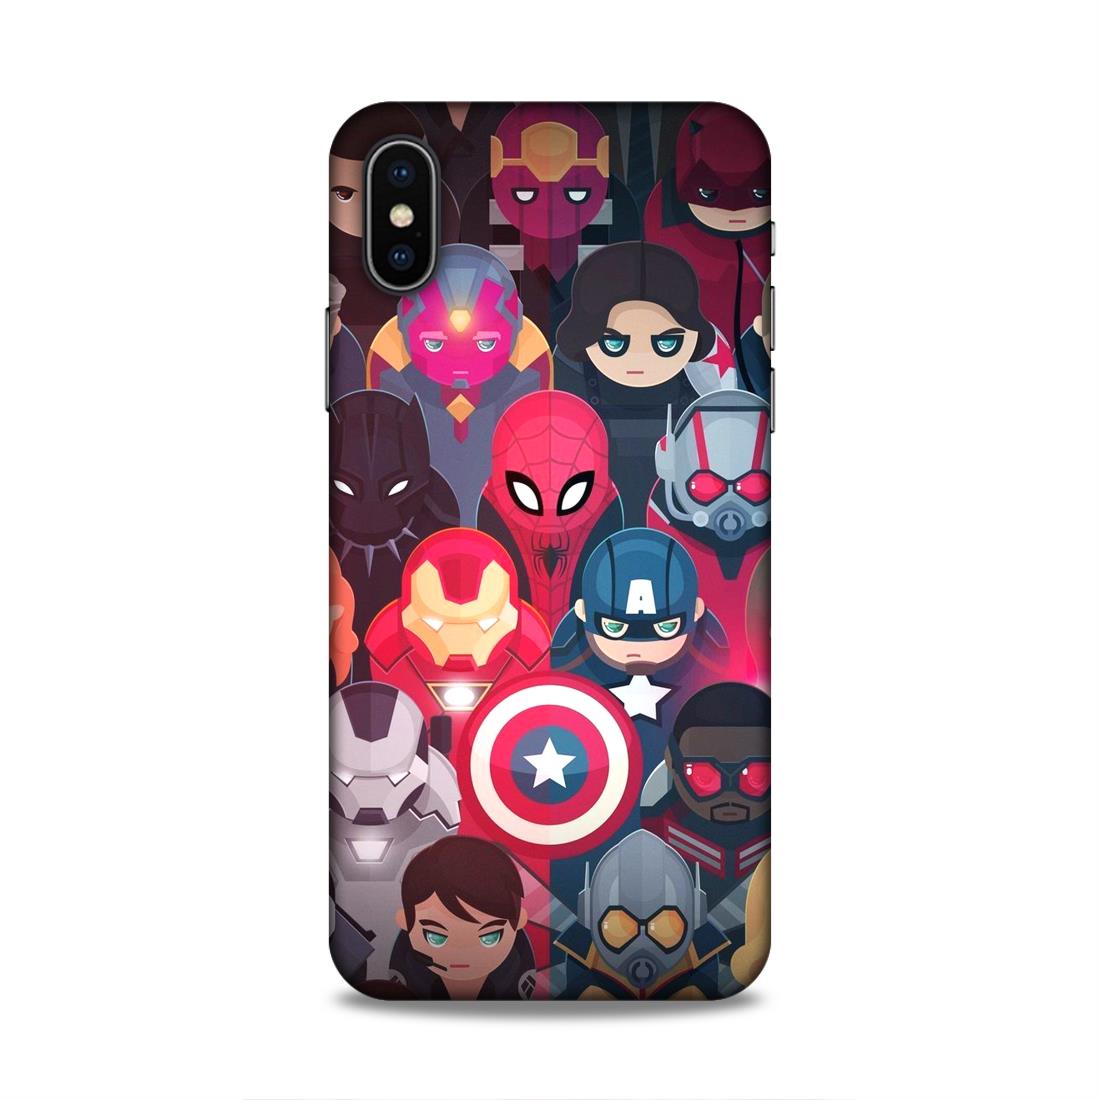 Avenger Heroes Hard Back Case For Apple iPhone X/XS